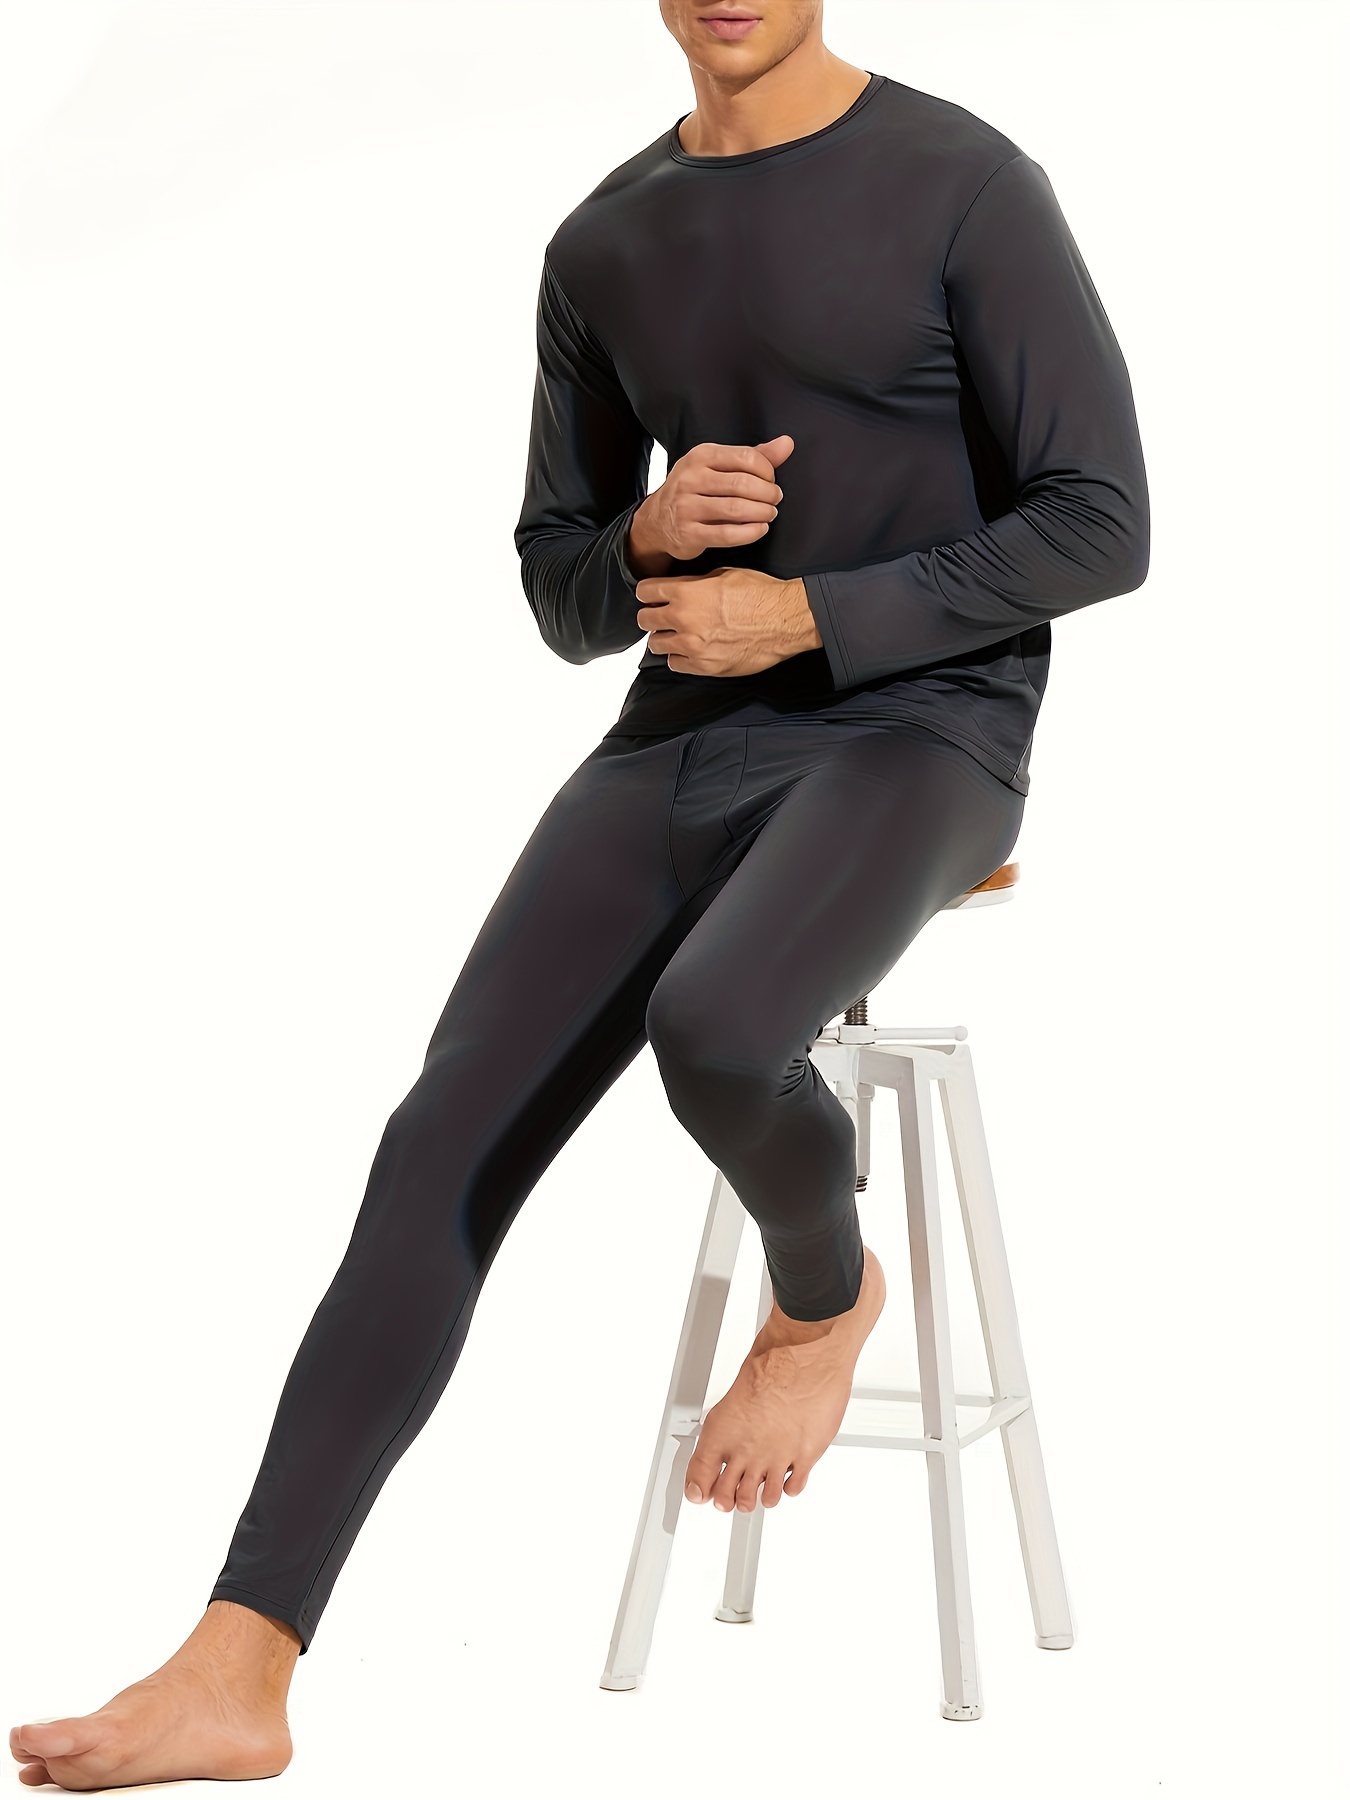 Thermal Underwear for Men Top And Bottom Thermal Trousers For